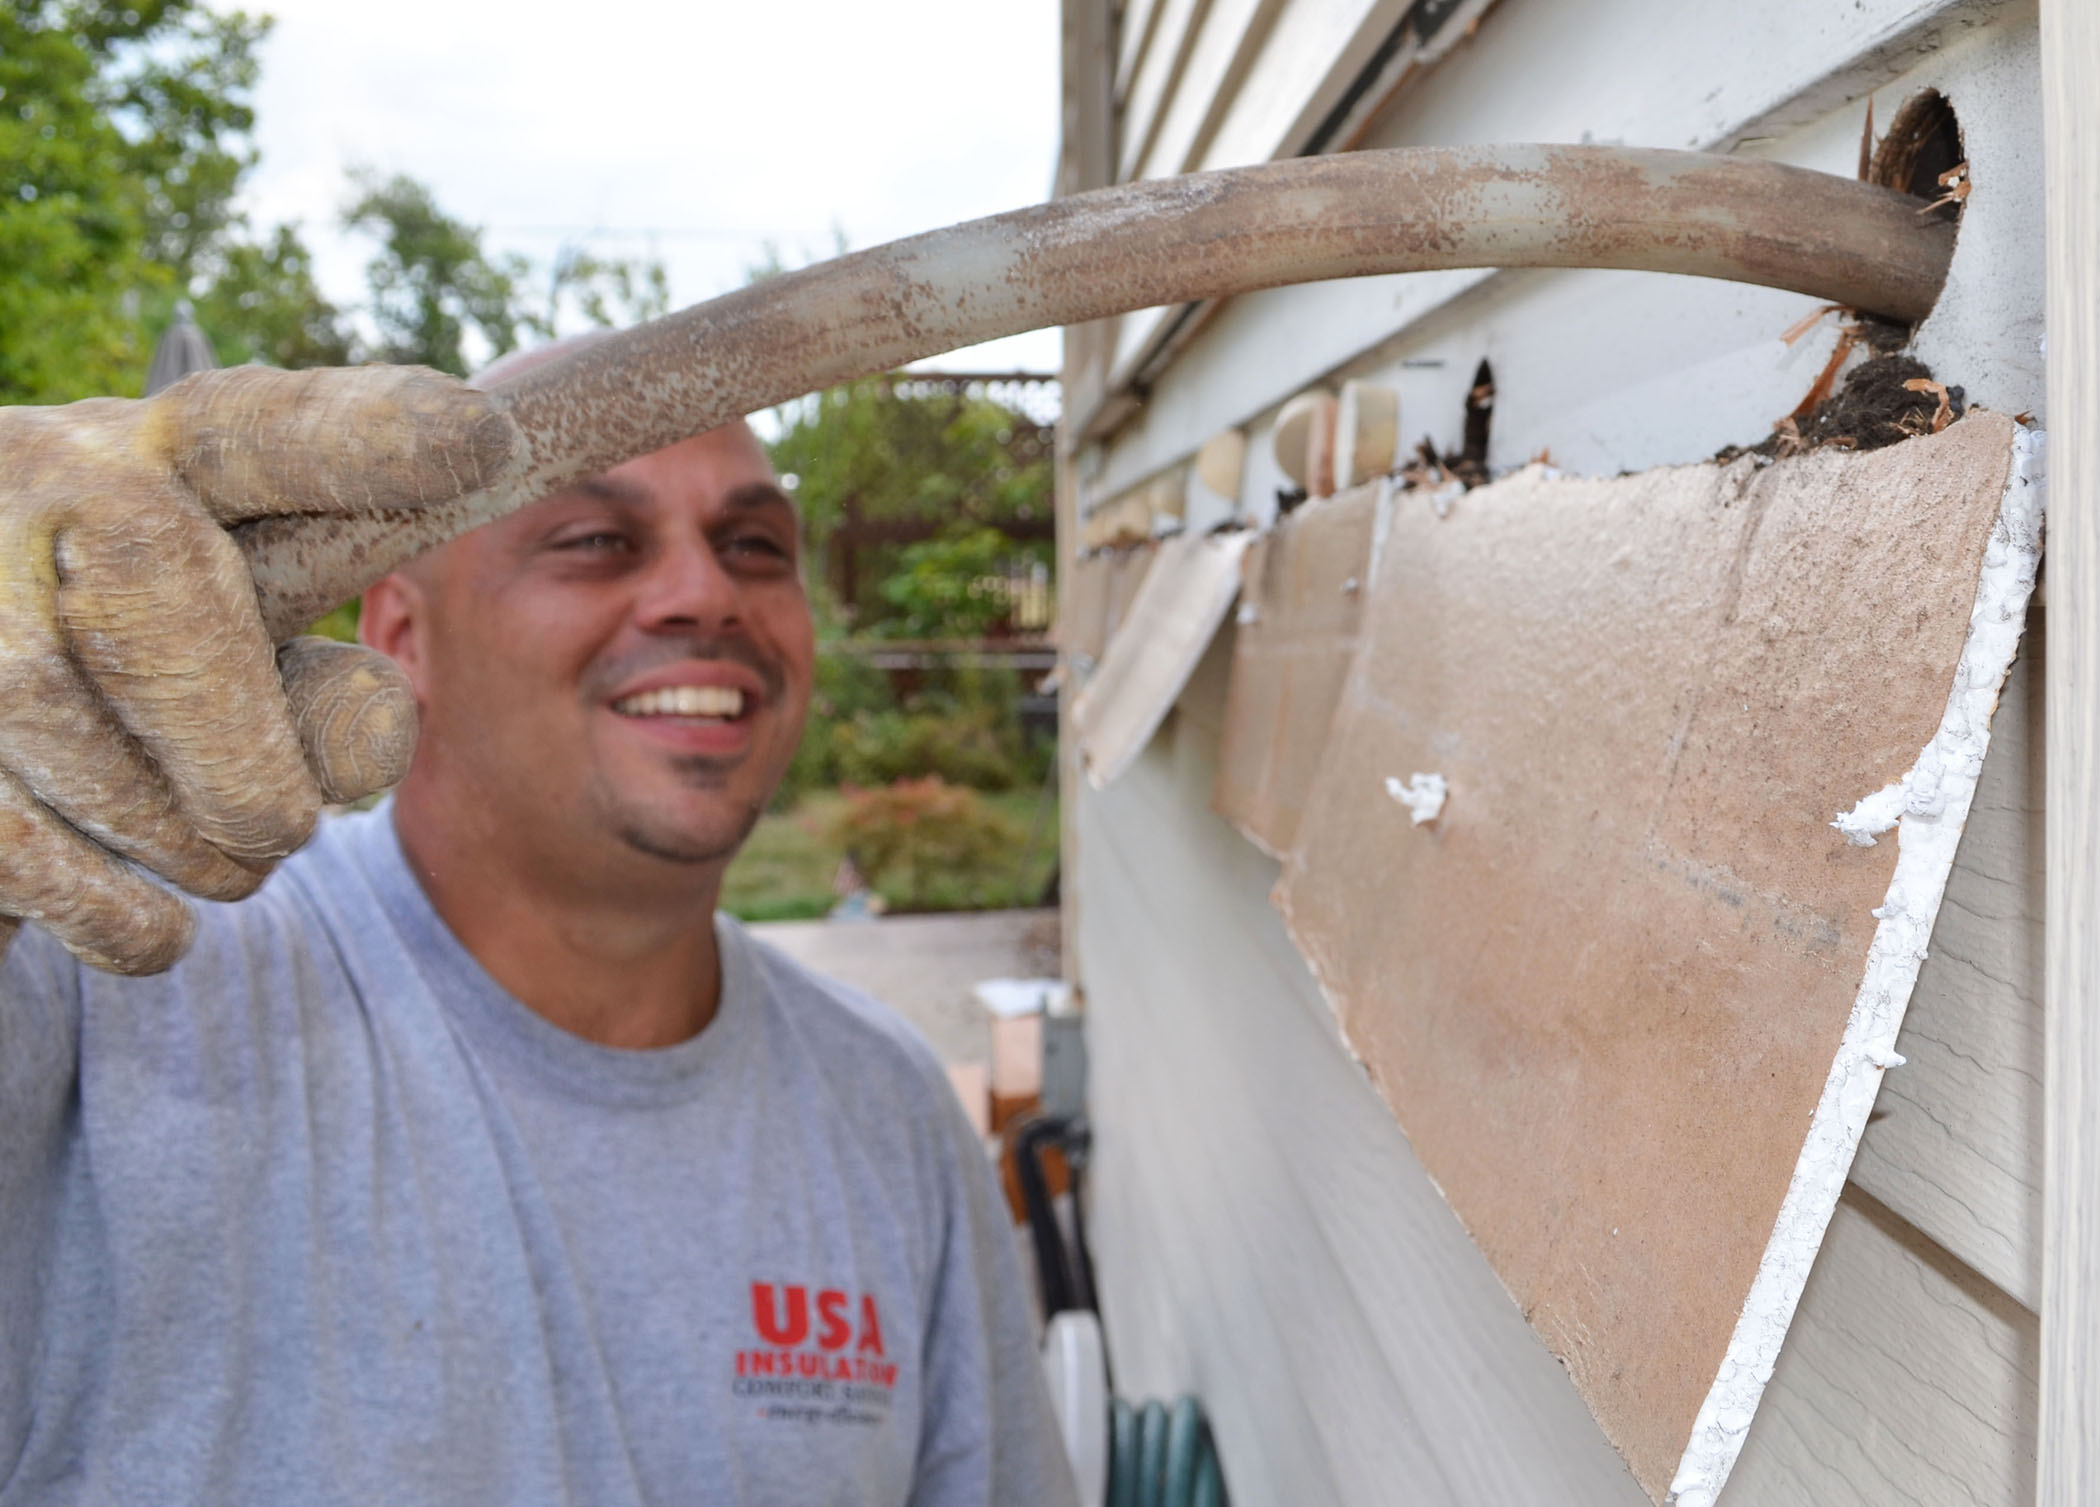 Installer injects USA Premium Foam into the wall cavity from outside the home.